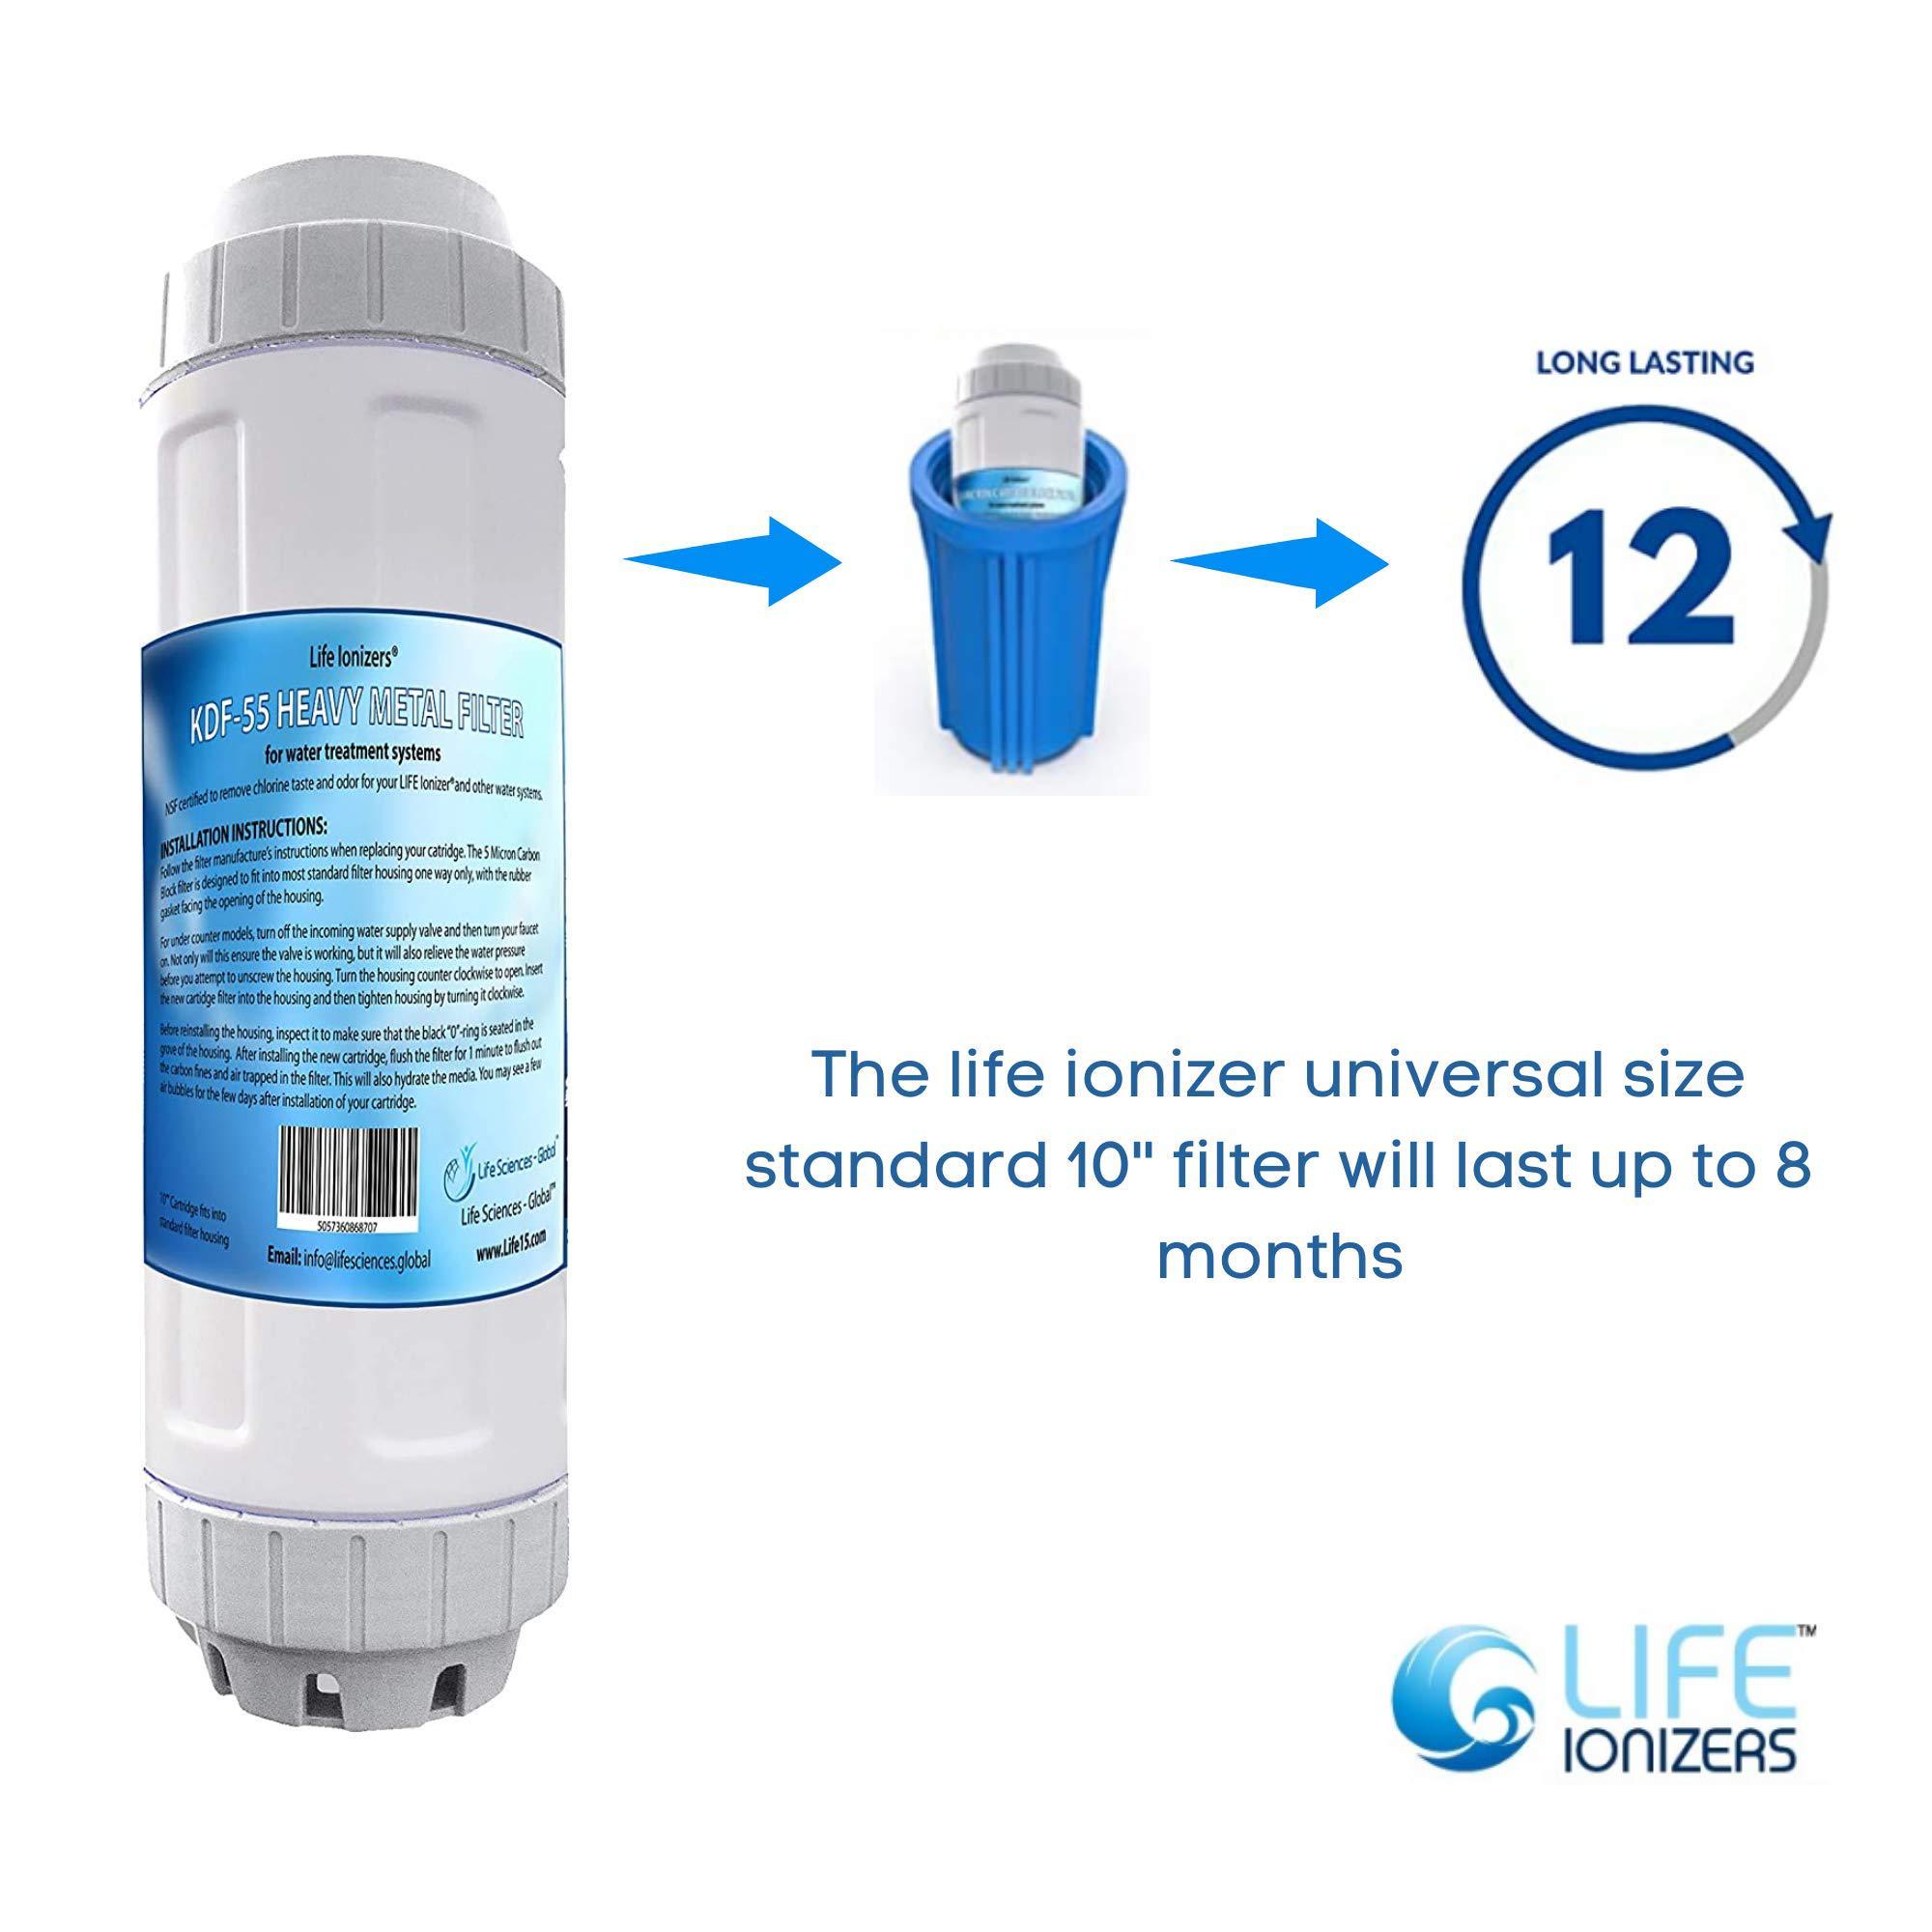 life ionizer | heavy metal removal kdf-55 pre-filter